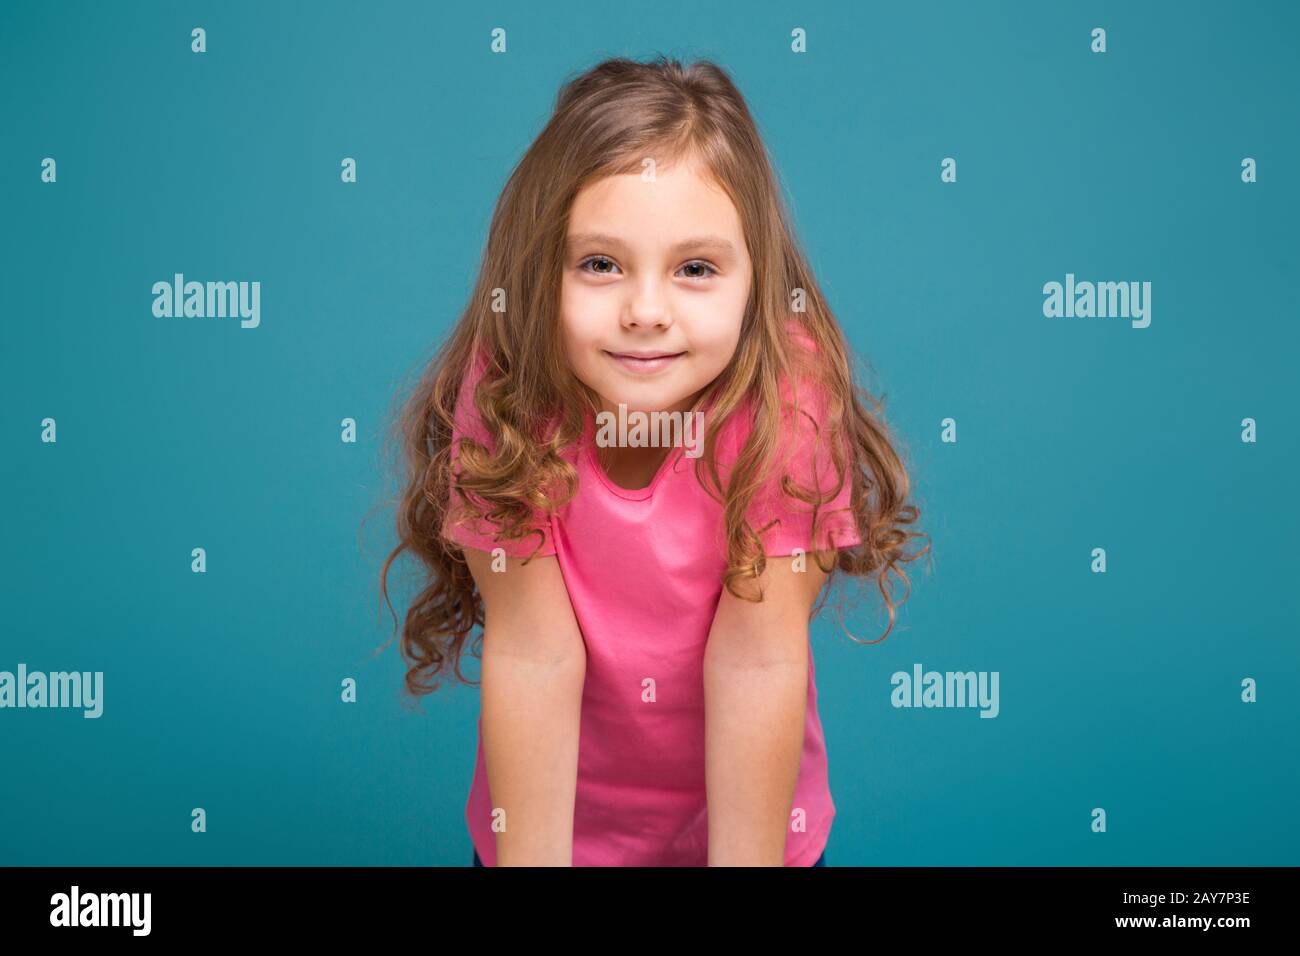 little girl with long brown hair